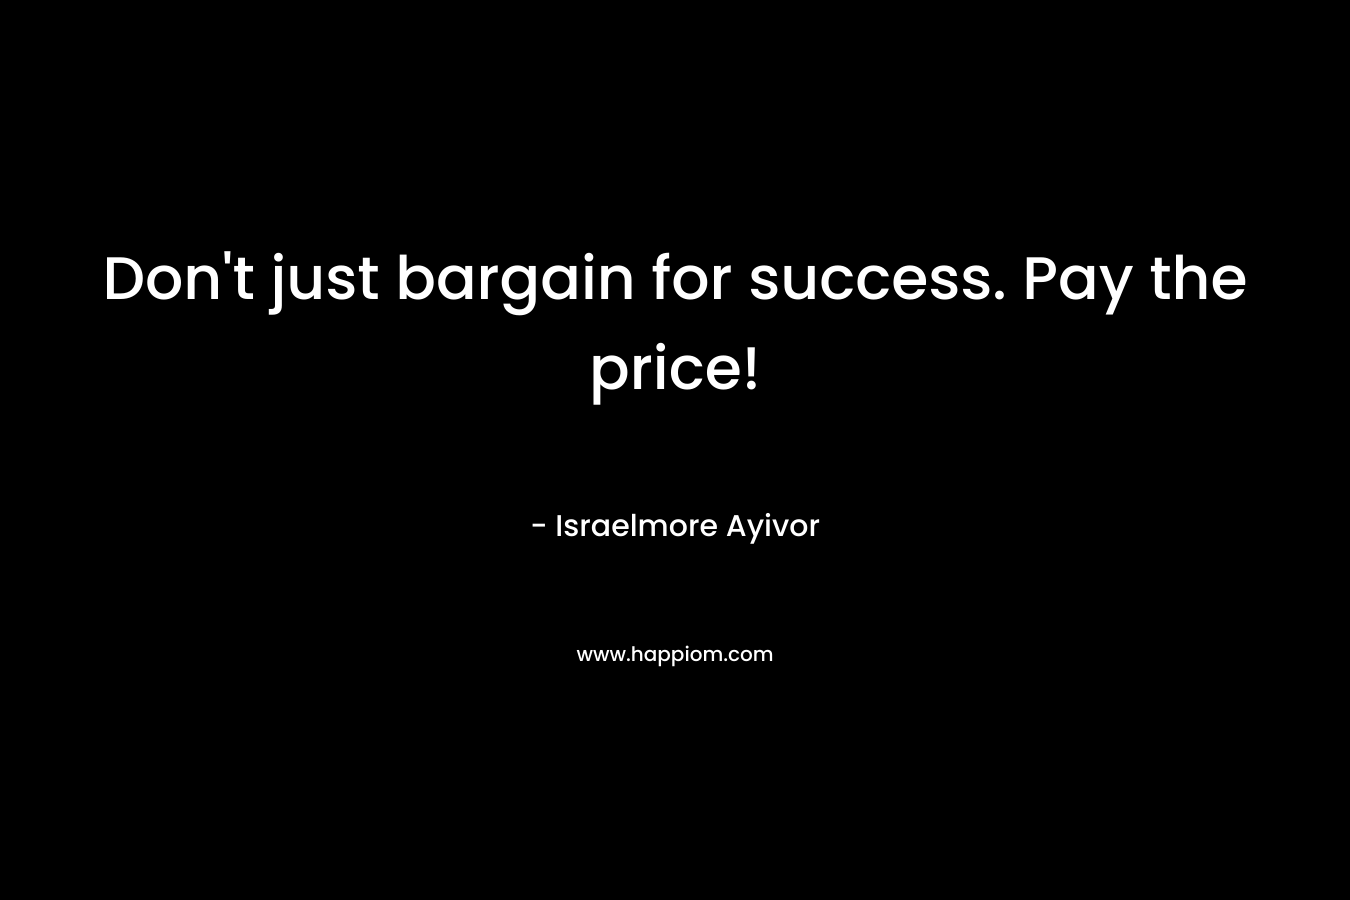 Don’t just bargain for success. Pay the price! – Israelmore Ayivor